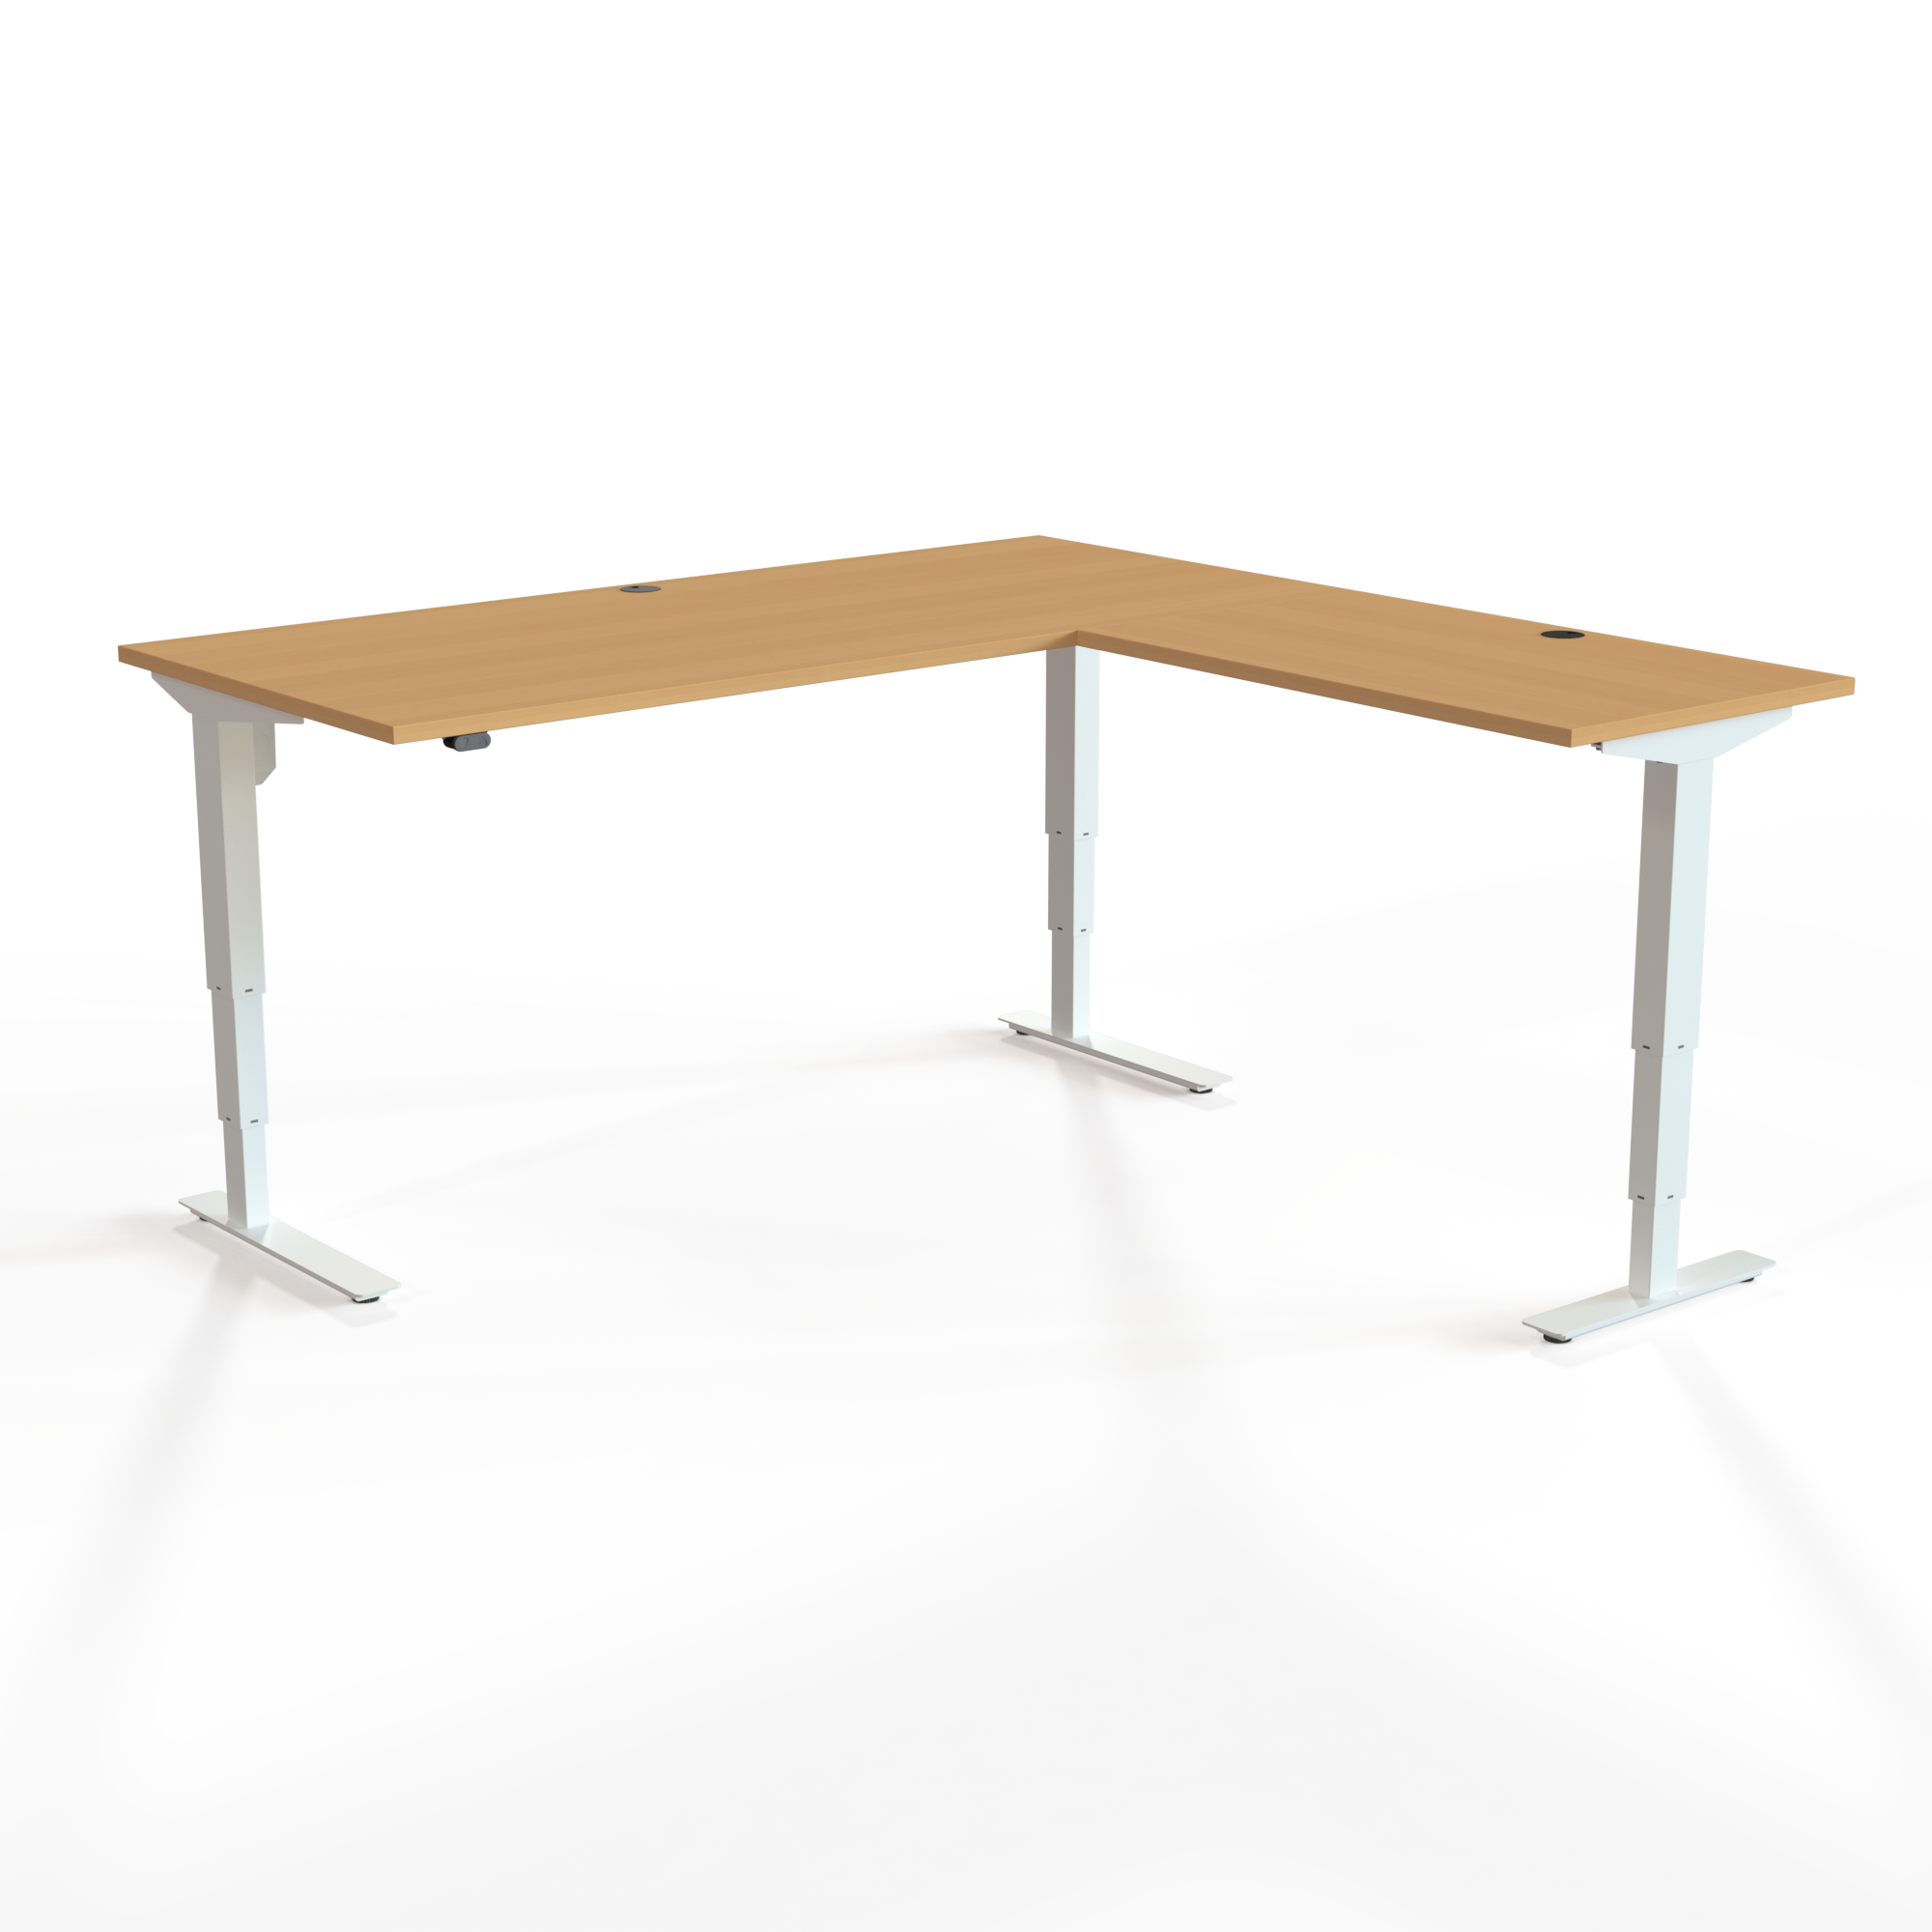 Electric Adjustable Desk | 180x180 cm | Beech with white frame